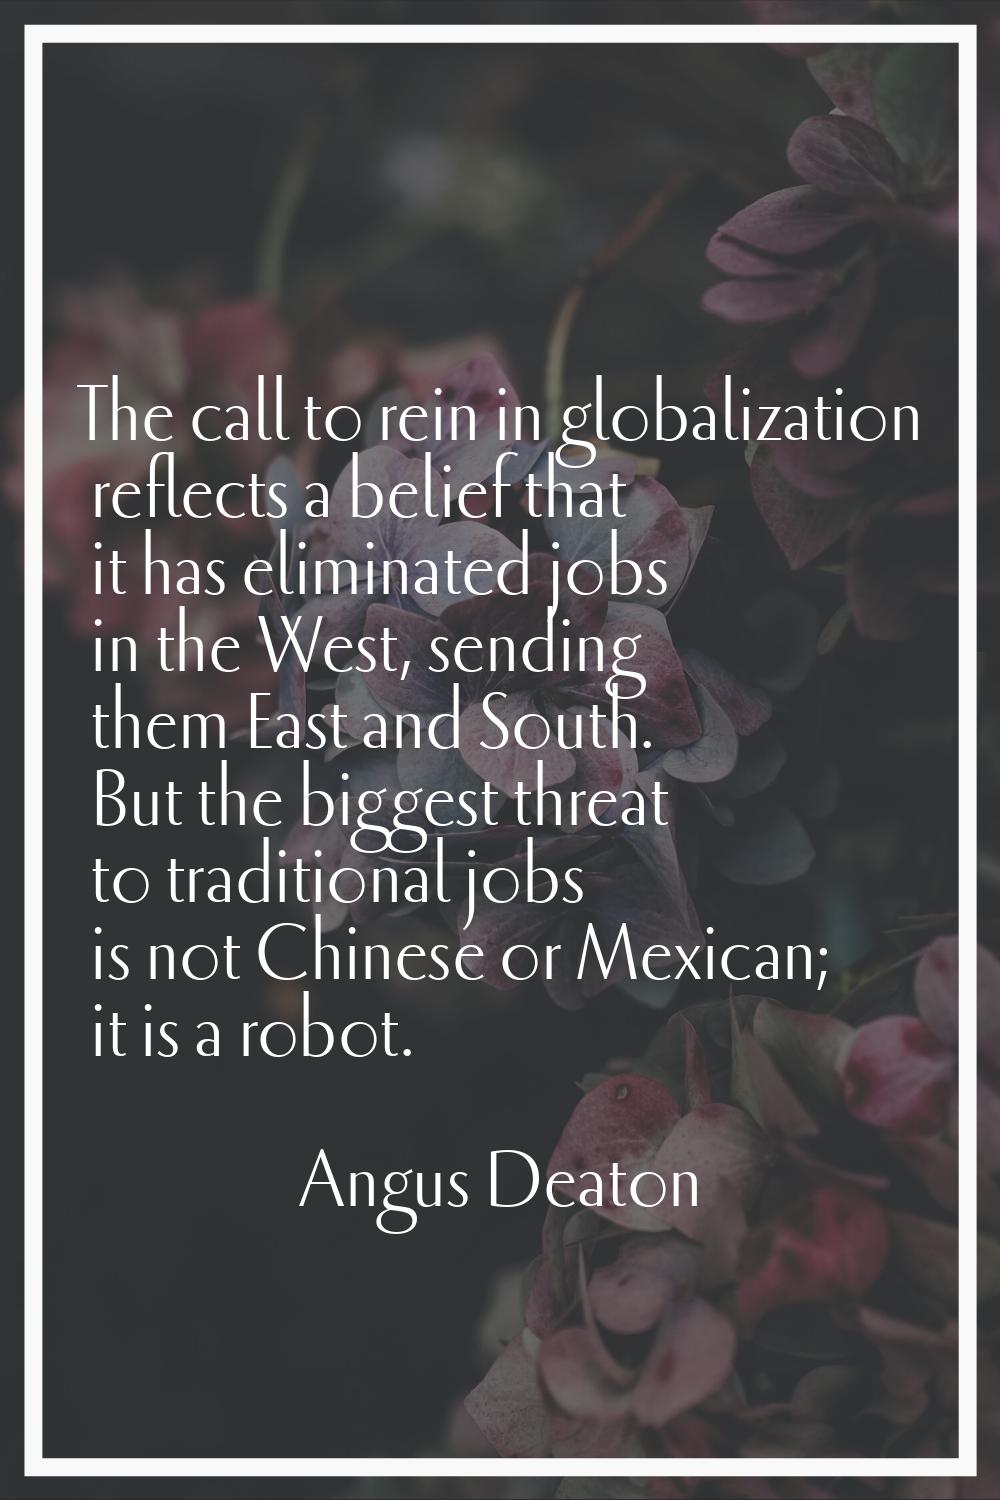 The call to rein in globalization reflects a belief that it has eliminated jobs in the West, sendin